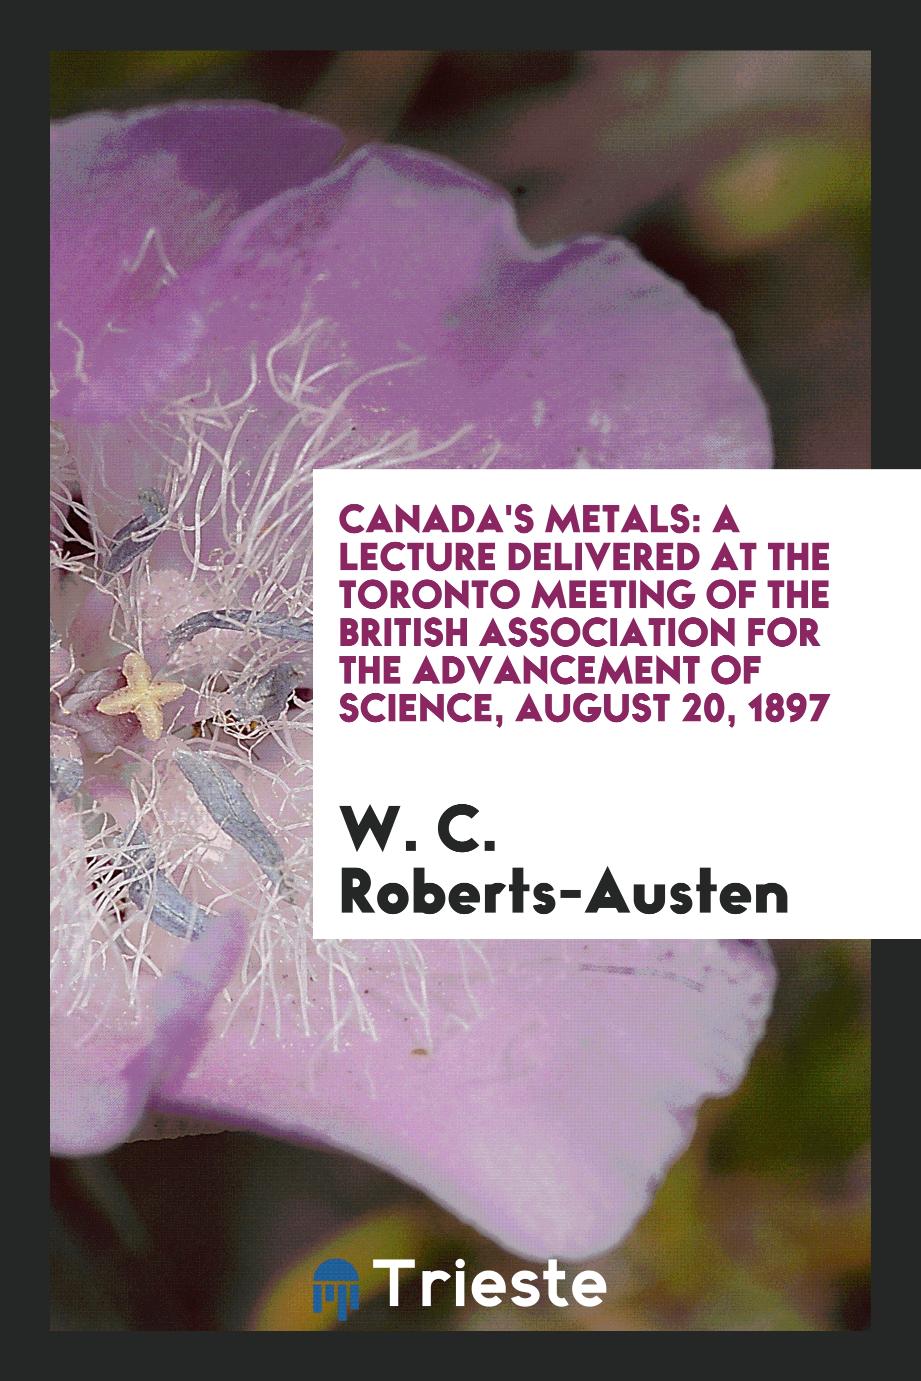 Canada's Metals: A Lecture Delivered at the Toronto Meeting of the British association for the advancement of science, August 20, 1897